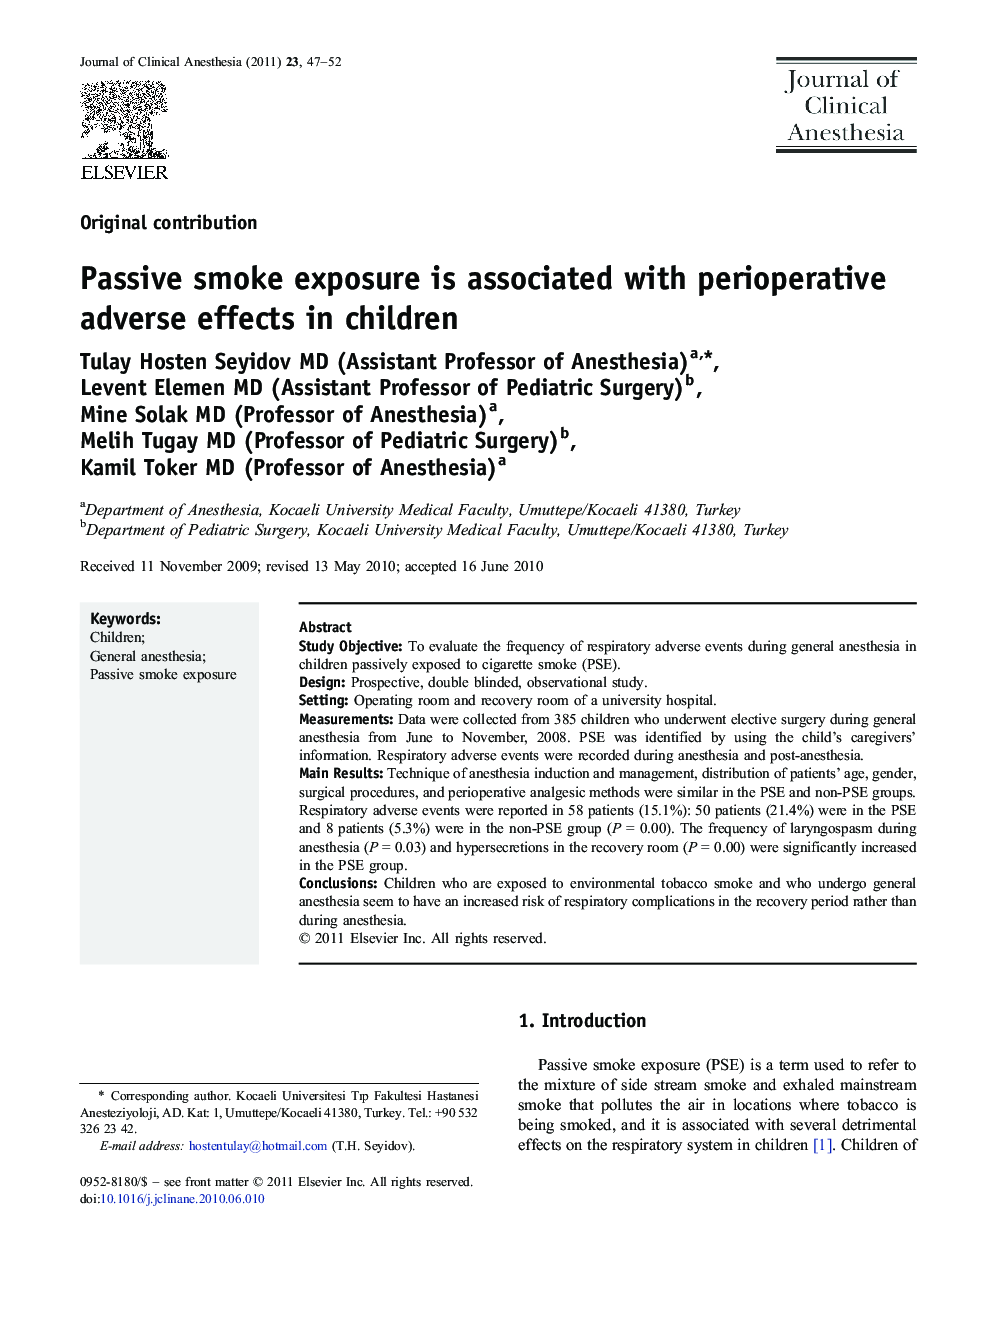 Passive smoke exposure is associated with perioperative adverse effects in children